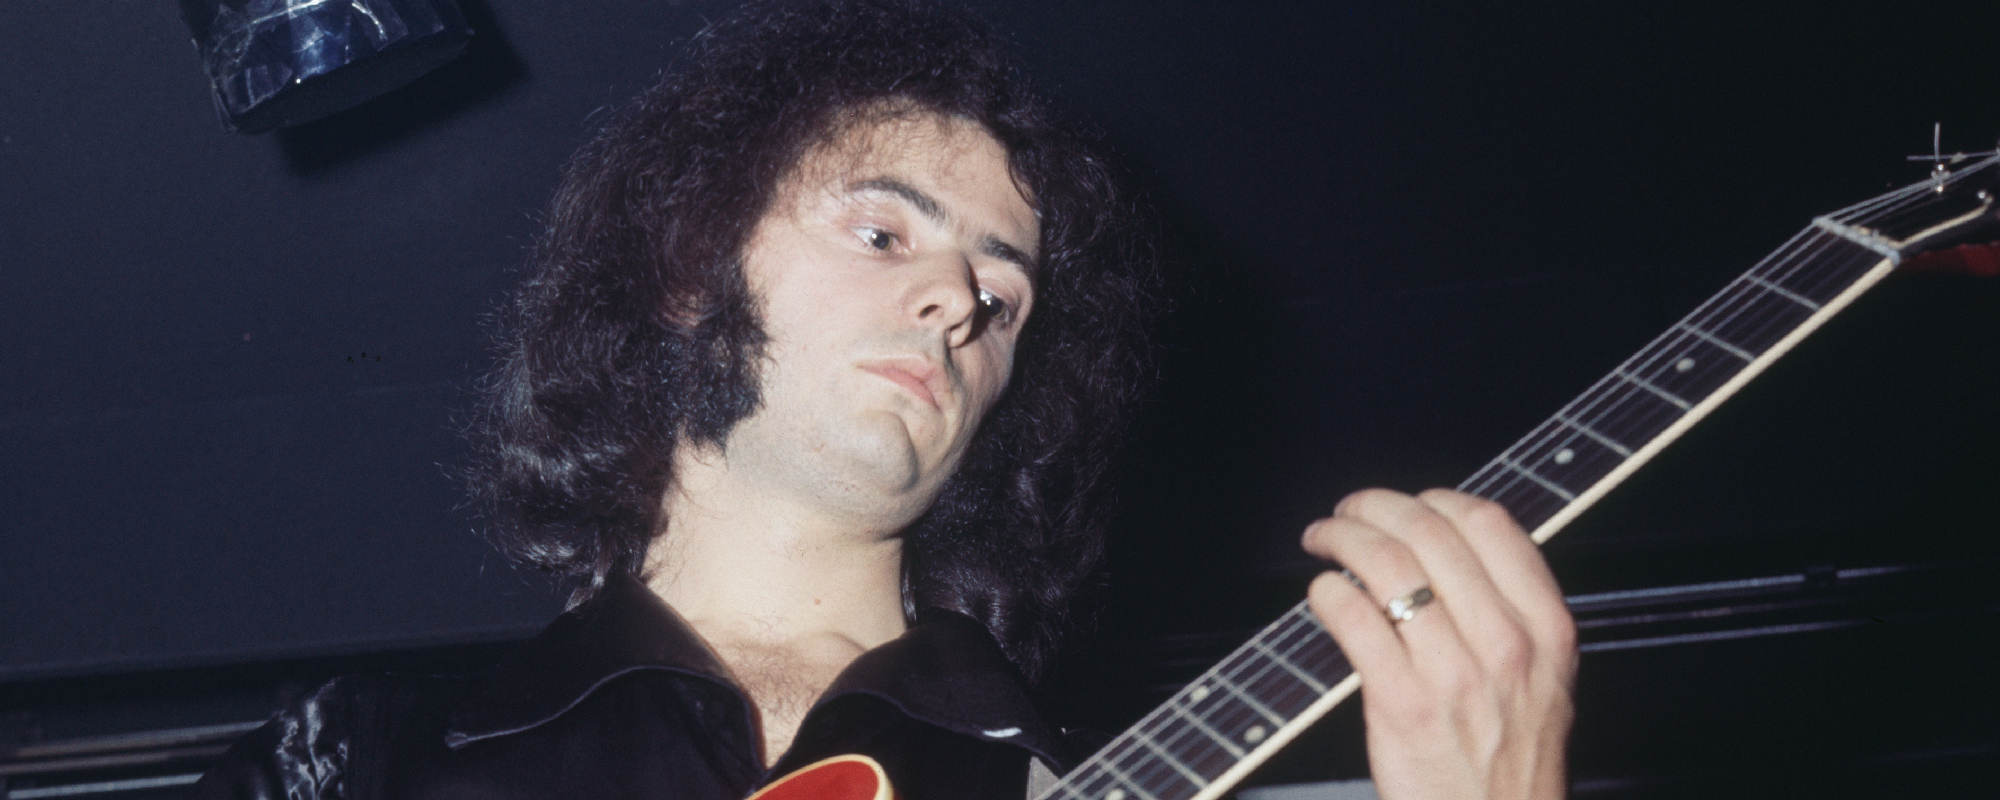 Deep Purple’s Ritchie Blackmore Honors His “First Guitar Idol” Duane Eddy With Touching Tribute Following His Death